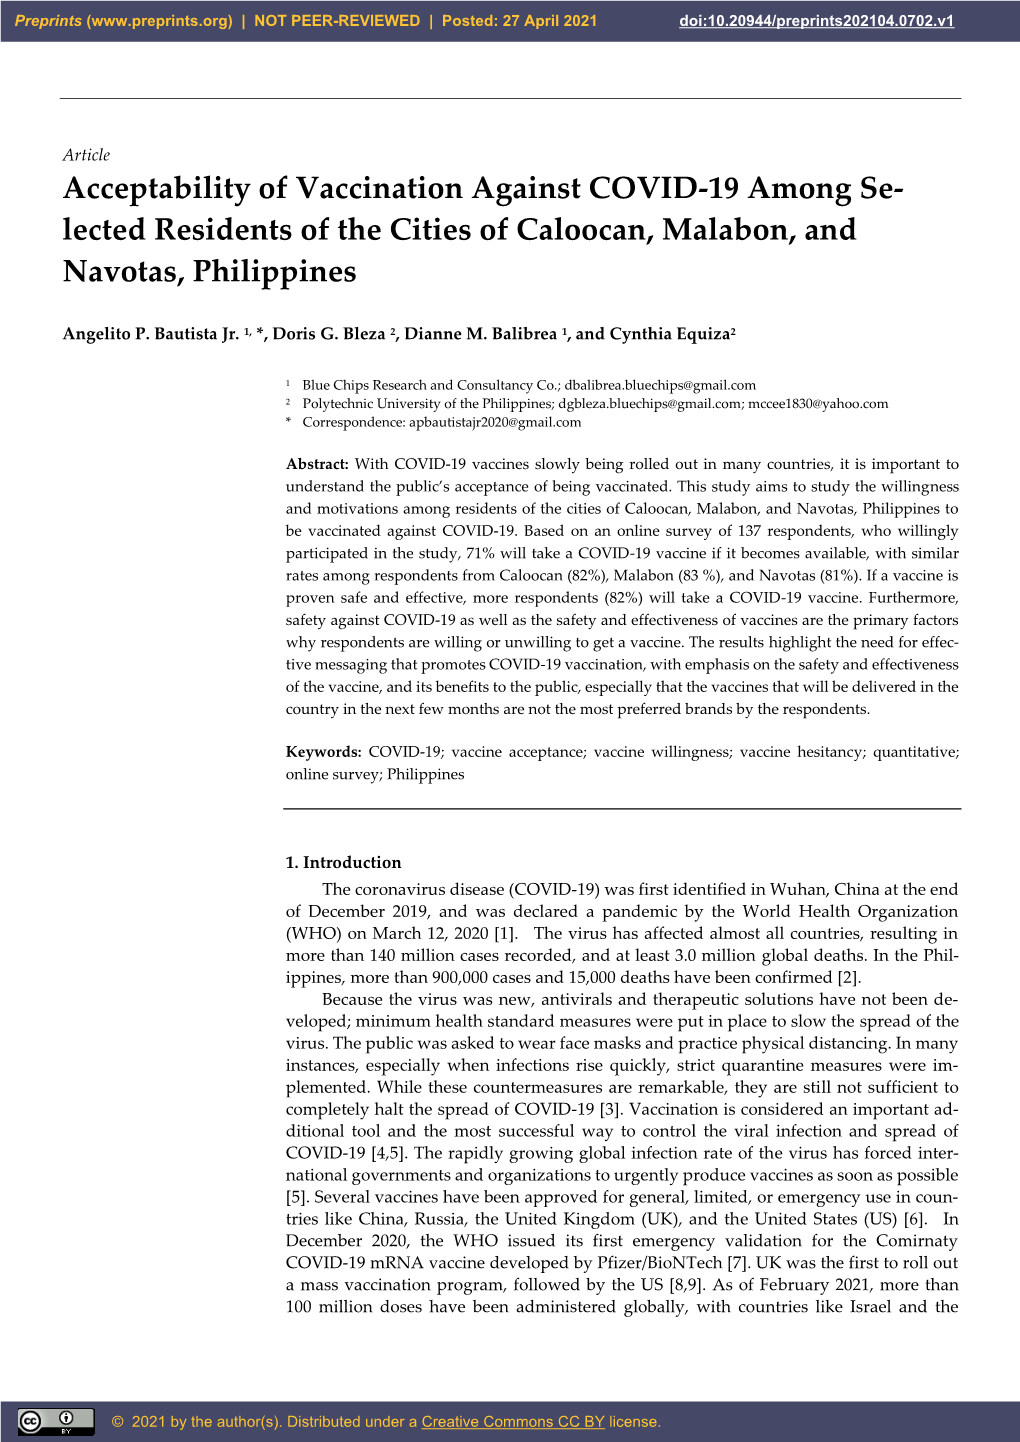 Acceptability of Vaccination Against COVID-19 Among Se- Lected Residents of the Cities of Caloocan, Malabon, and Navotas, Philippines